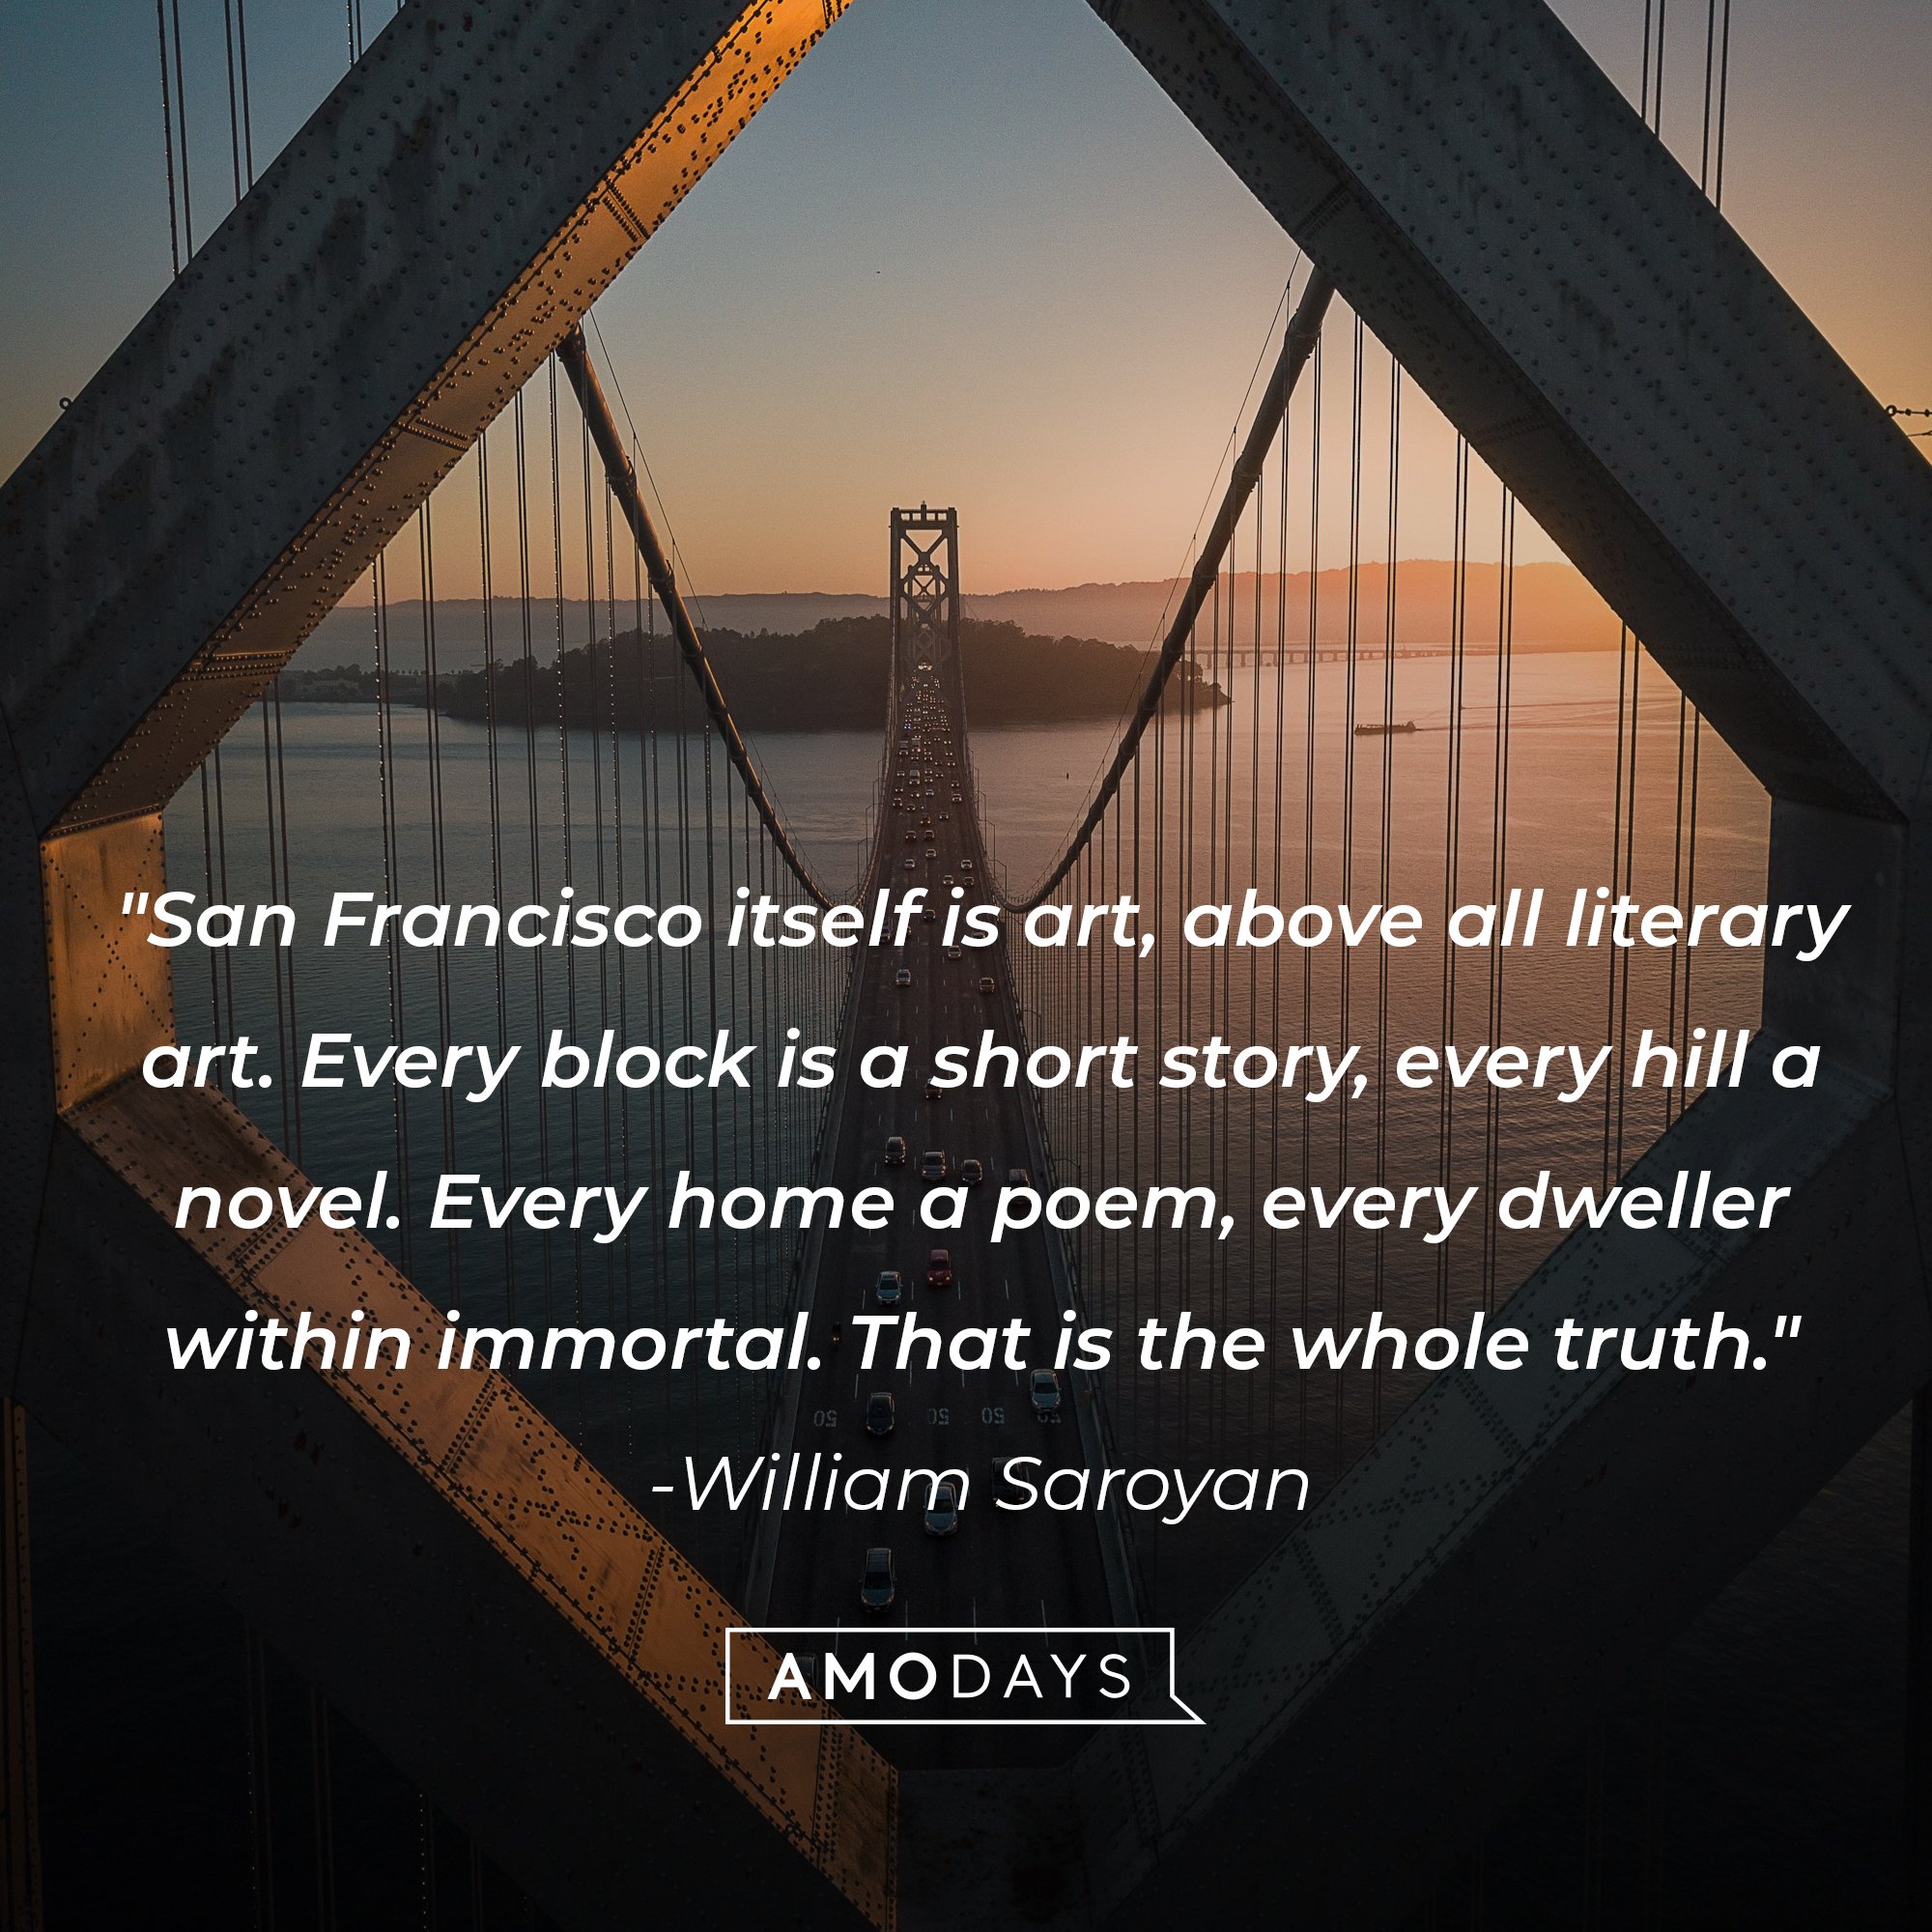 William Saroyan’s quote: "San Francisco itself is art, above all literary art. Every block is a short story, every hill a novel. Every home a poem, every dweller within immortal. That is the whole truth." | Image: AmoDays